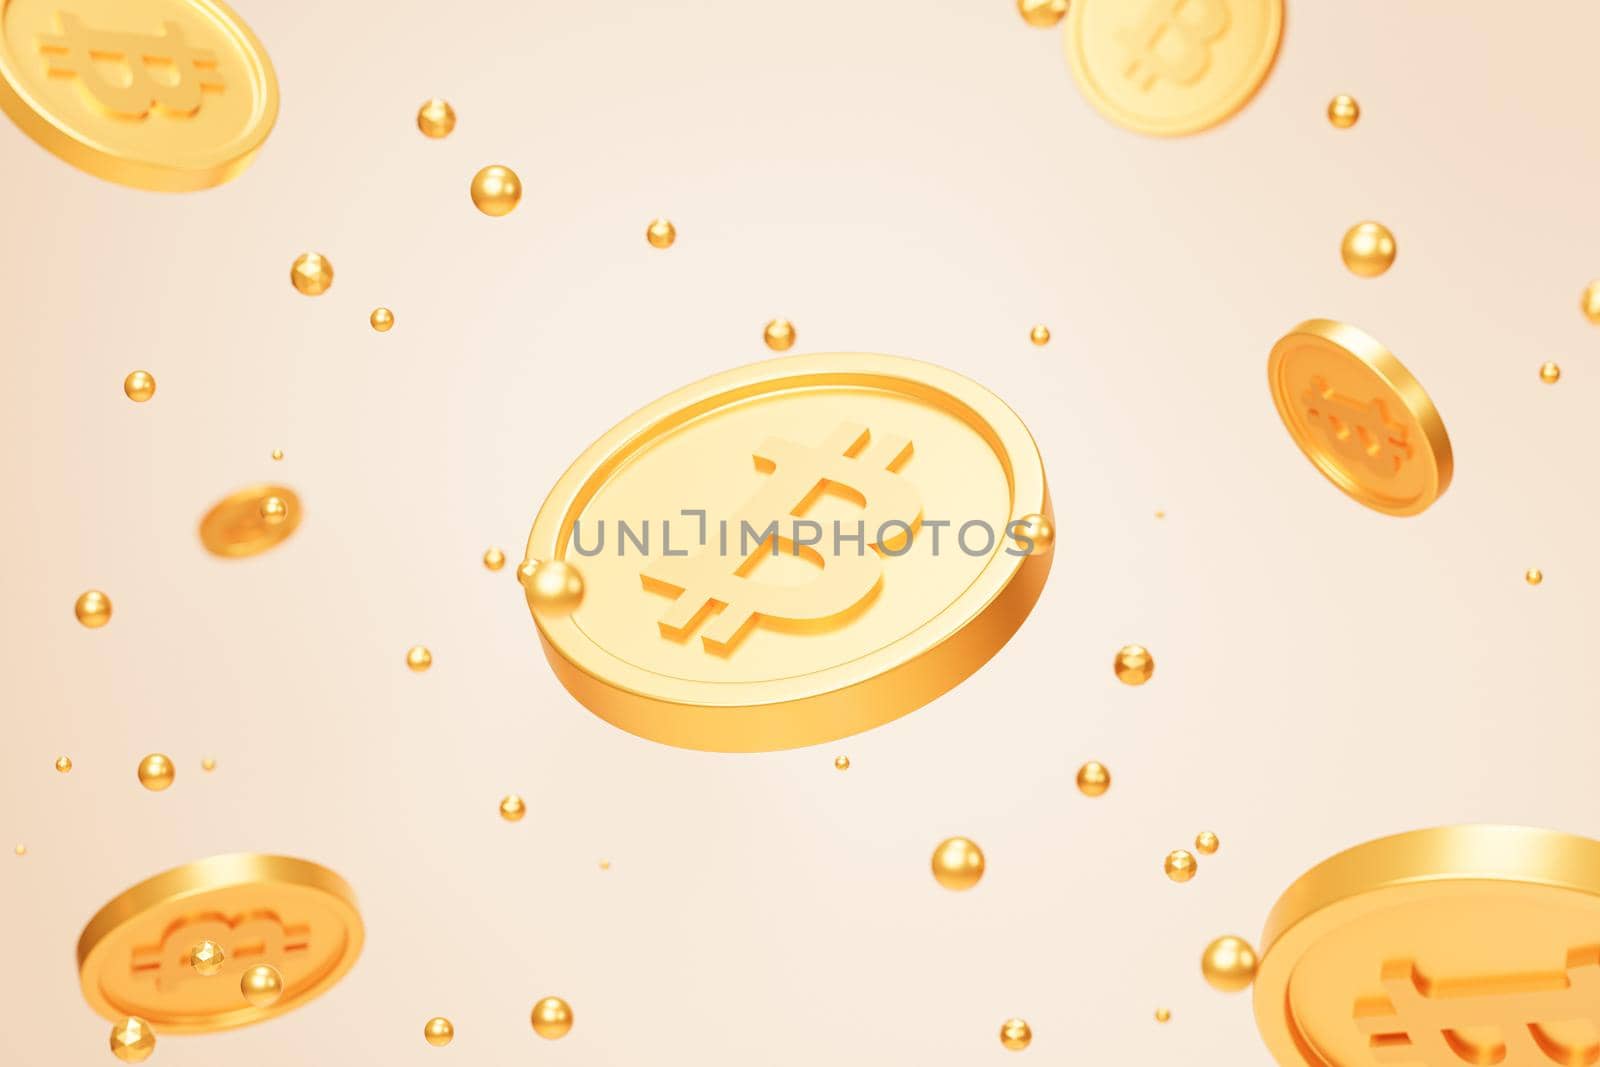 Bitcoin crypto currency gold coins, e-commerce investment concept, 3d render on beige background by Frostroomhead